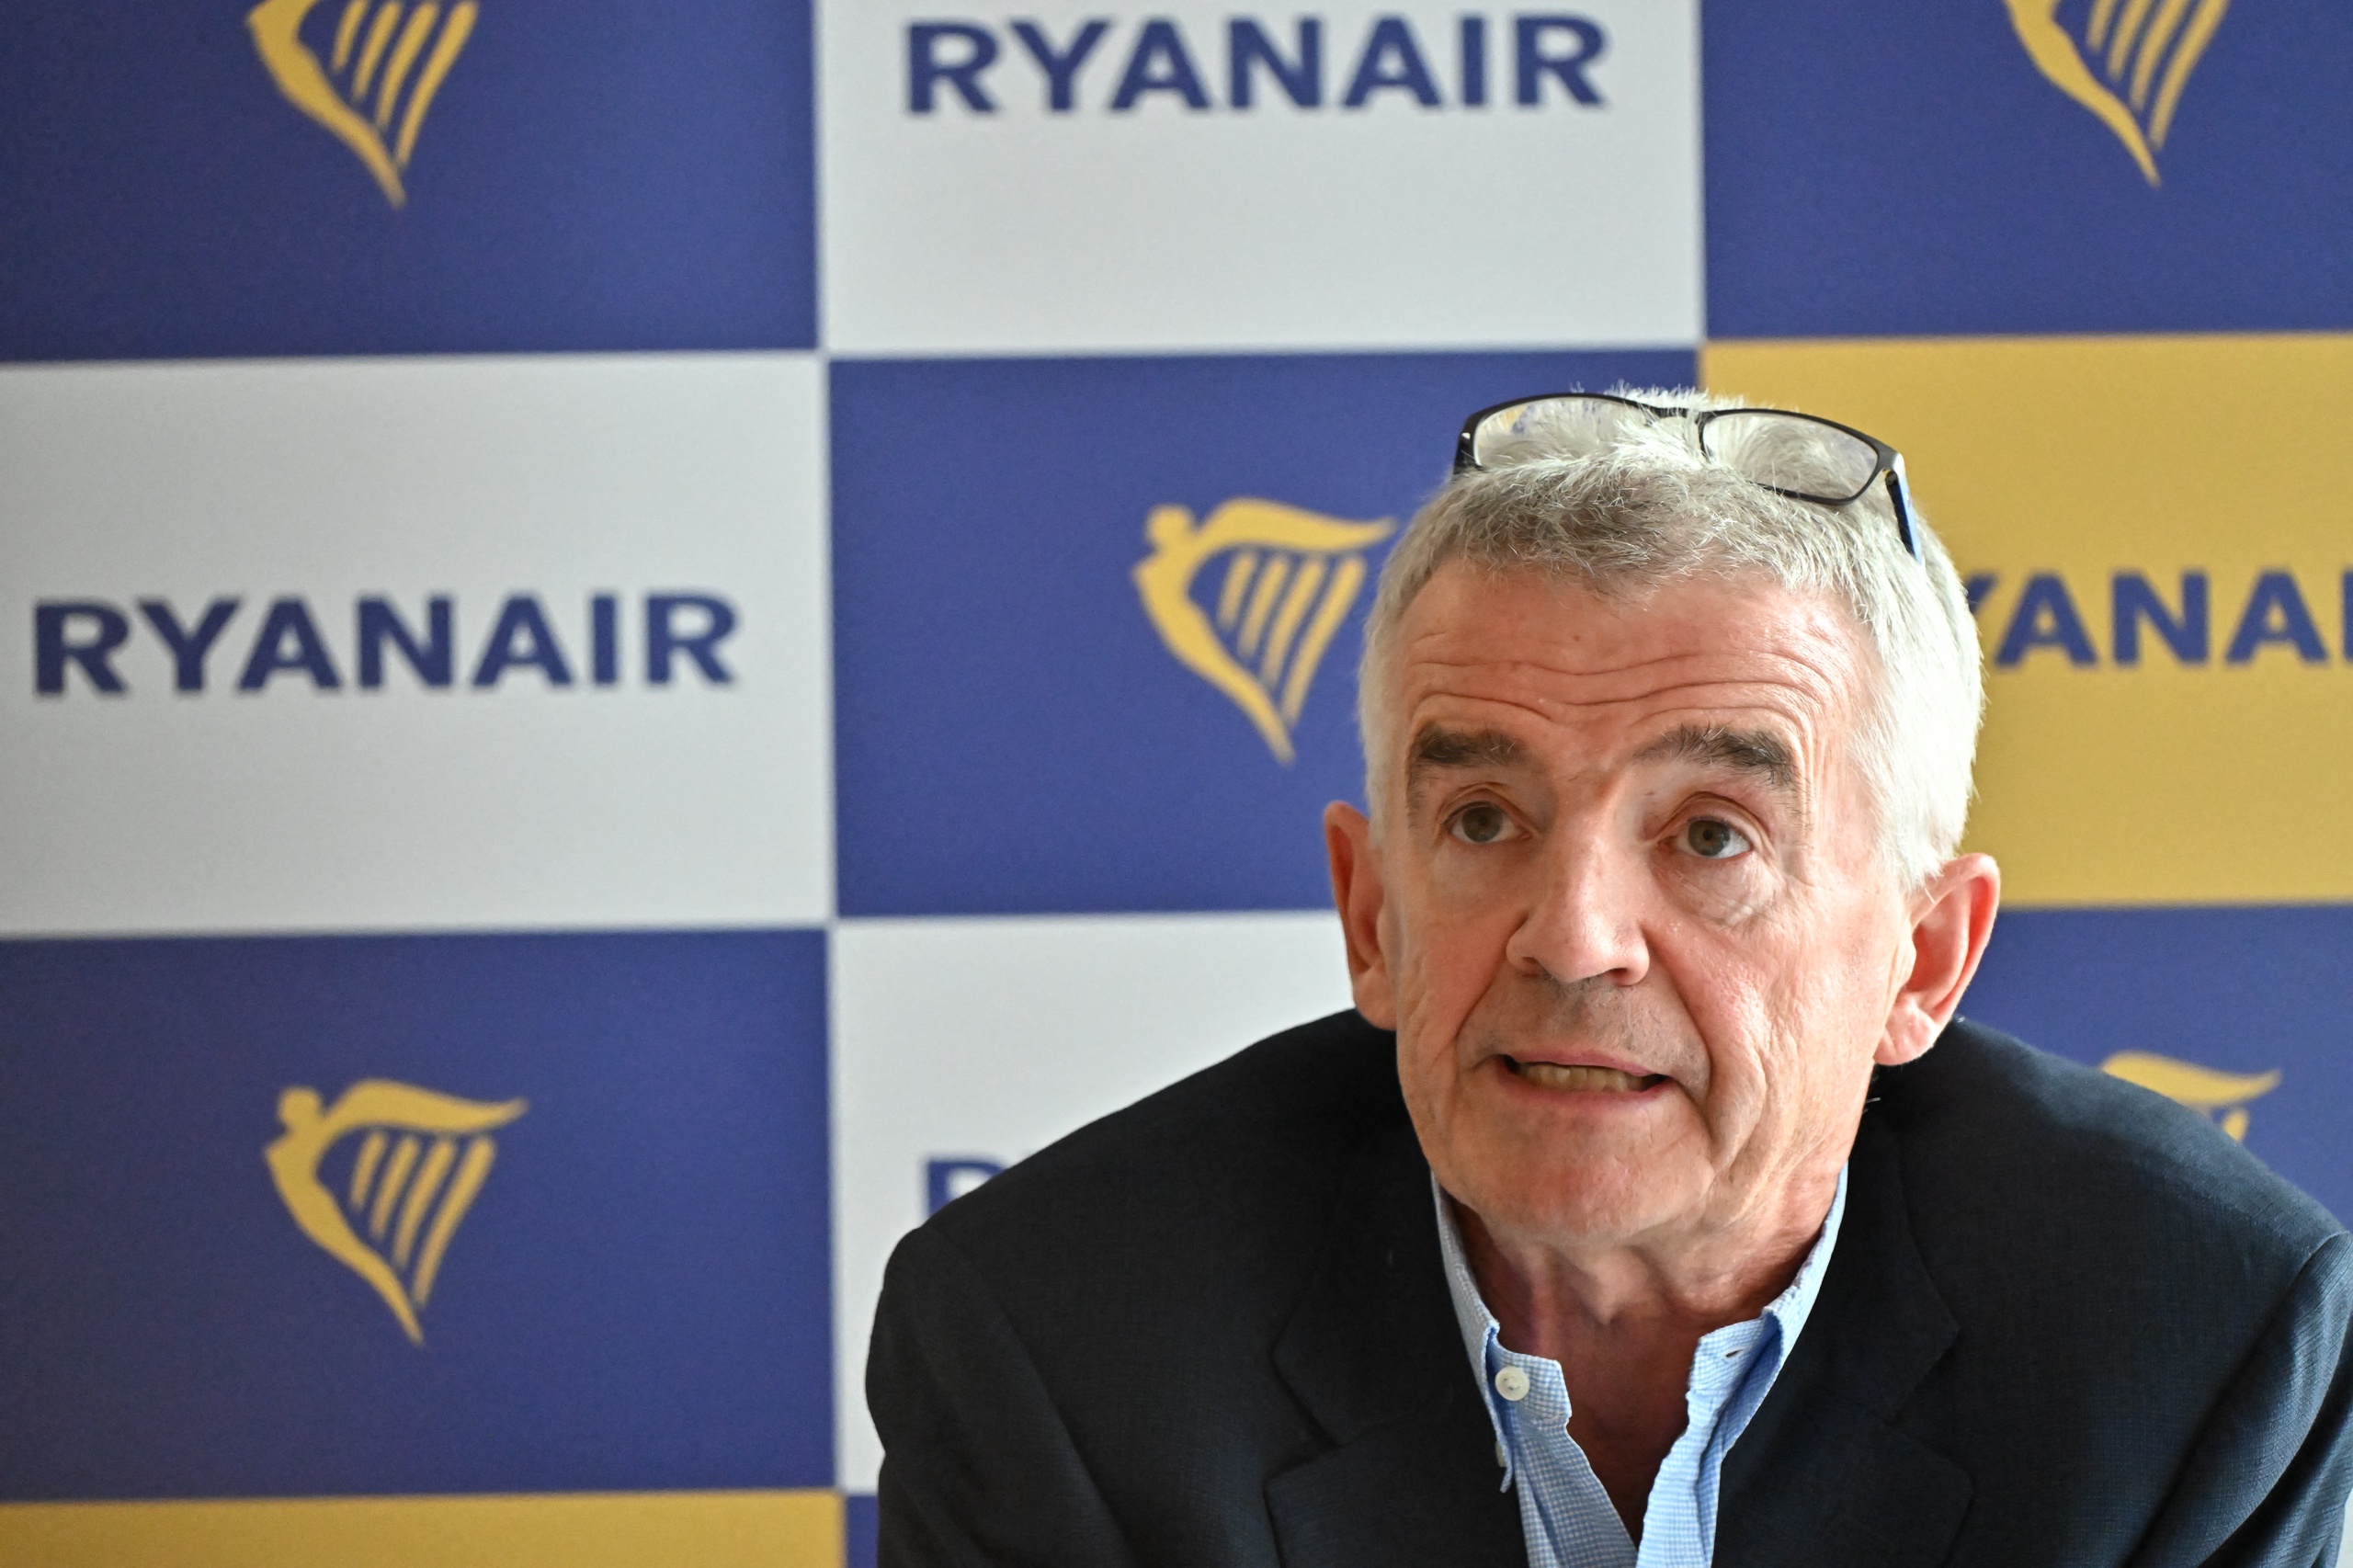 Michael O’Leary, CEO of Irish budget airline Ryanair, gives a press conference in Budapest, Hungary on September 13, 2022. Hungary had slapped a fine on Irish airline Ryanair in August 2022 for passing on to customers the cost of a special tax that Budapest has imposed on some companies in response to surging inflation. Attila KISBENEDEK / AFP